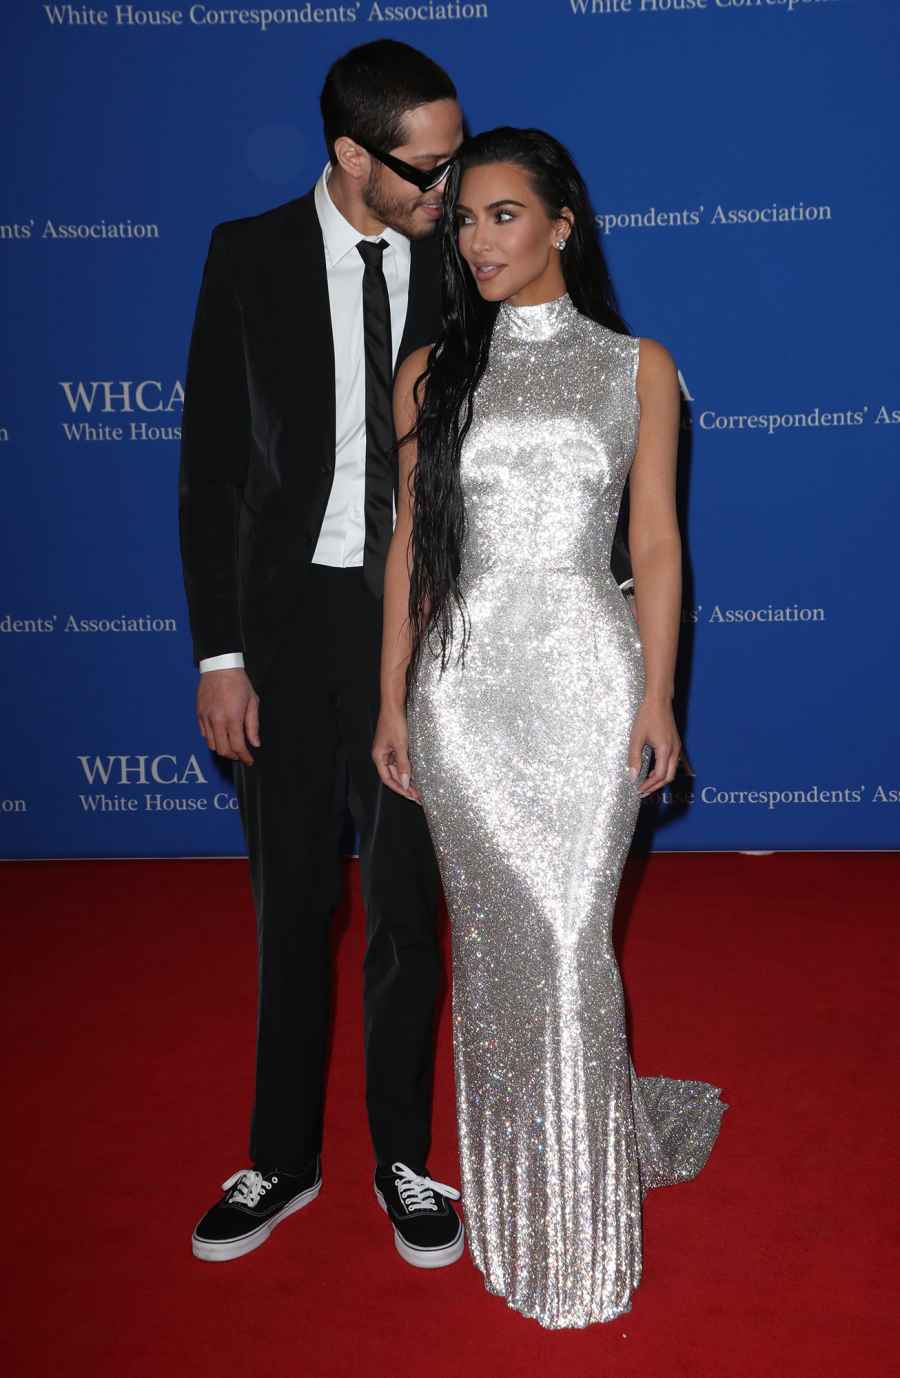 Pete Davidson and Kim Kardashian are seen posing at their first red carpet together